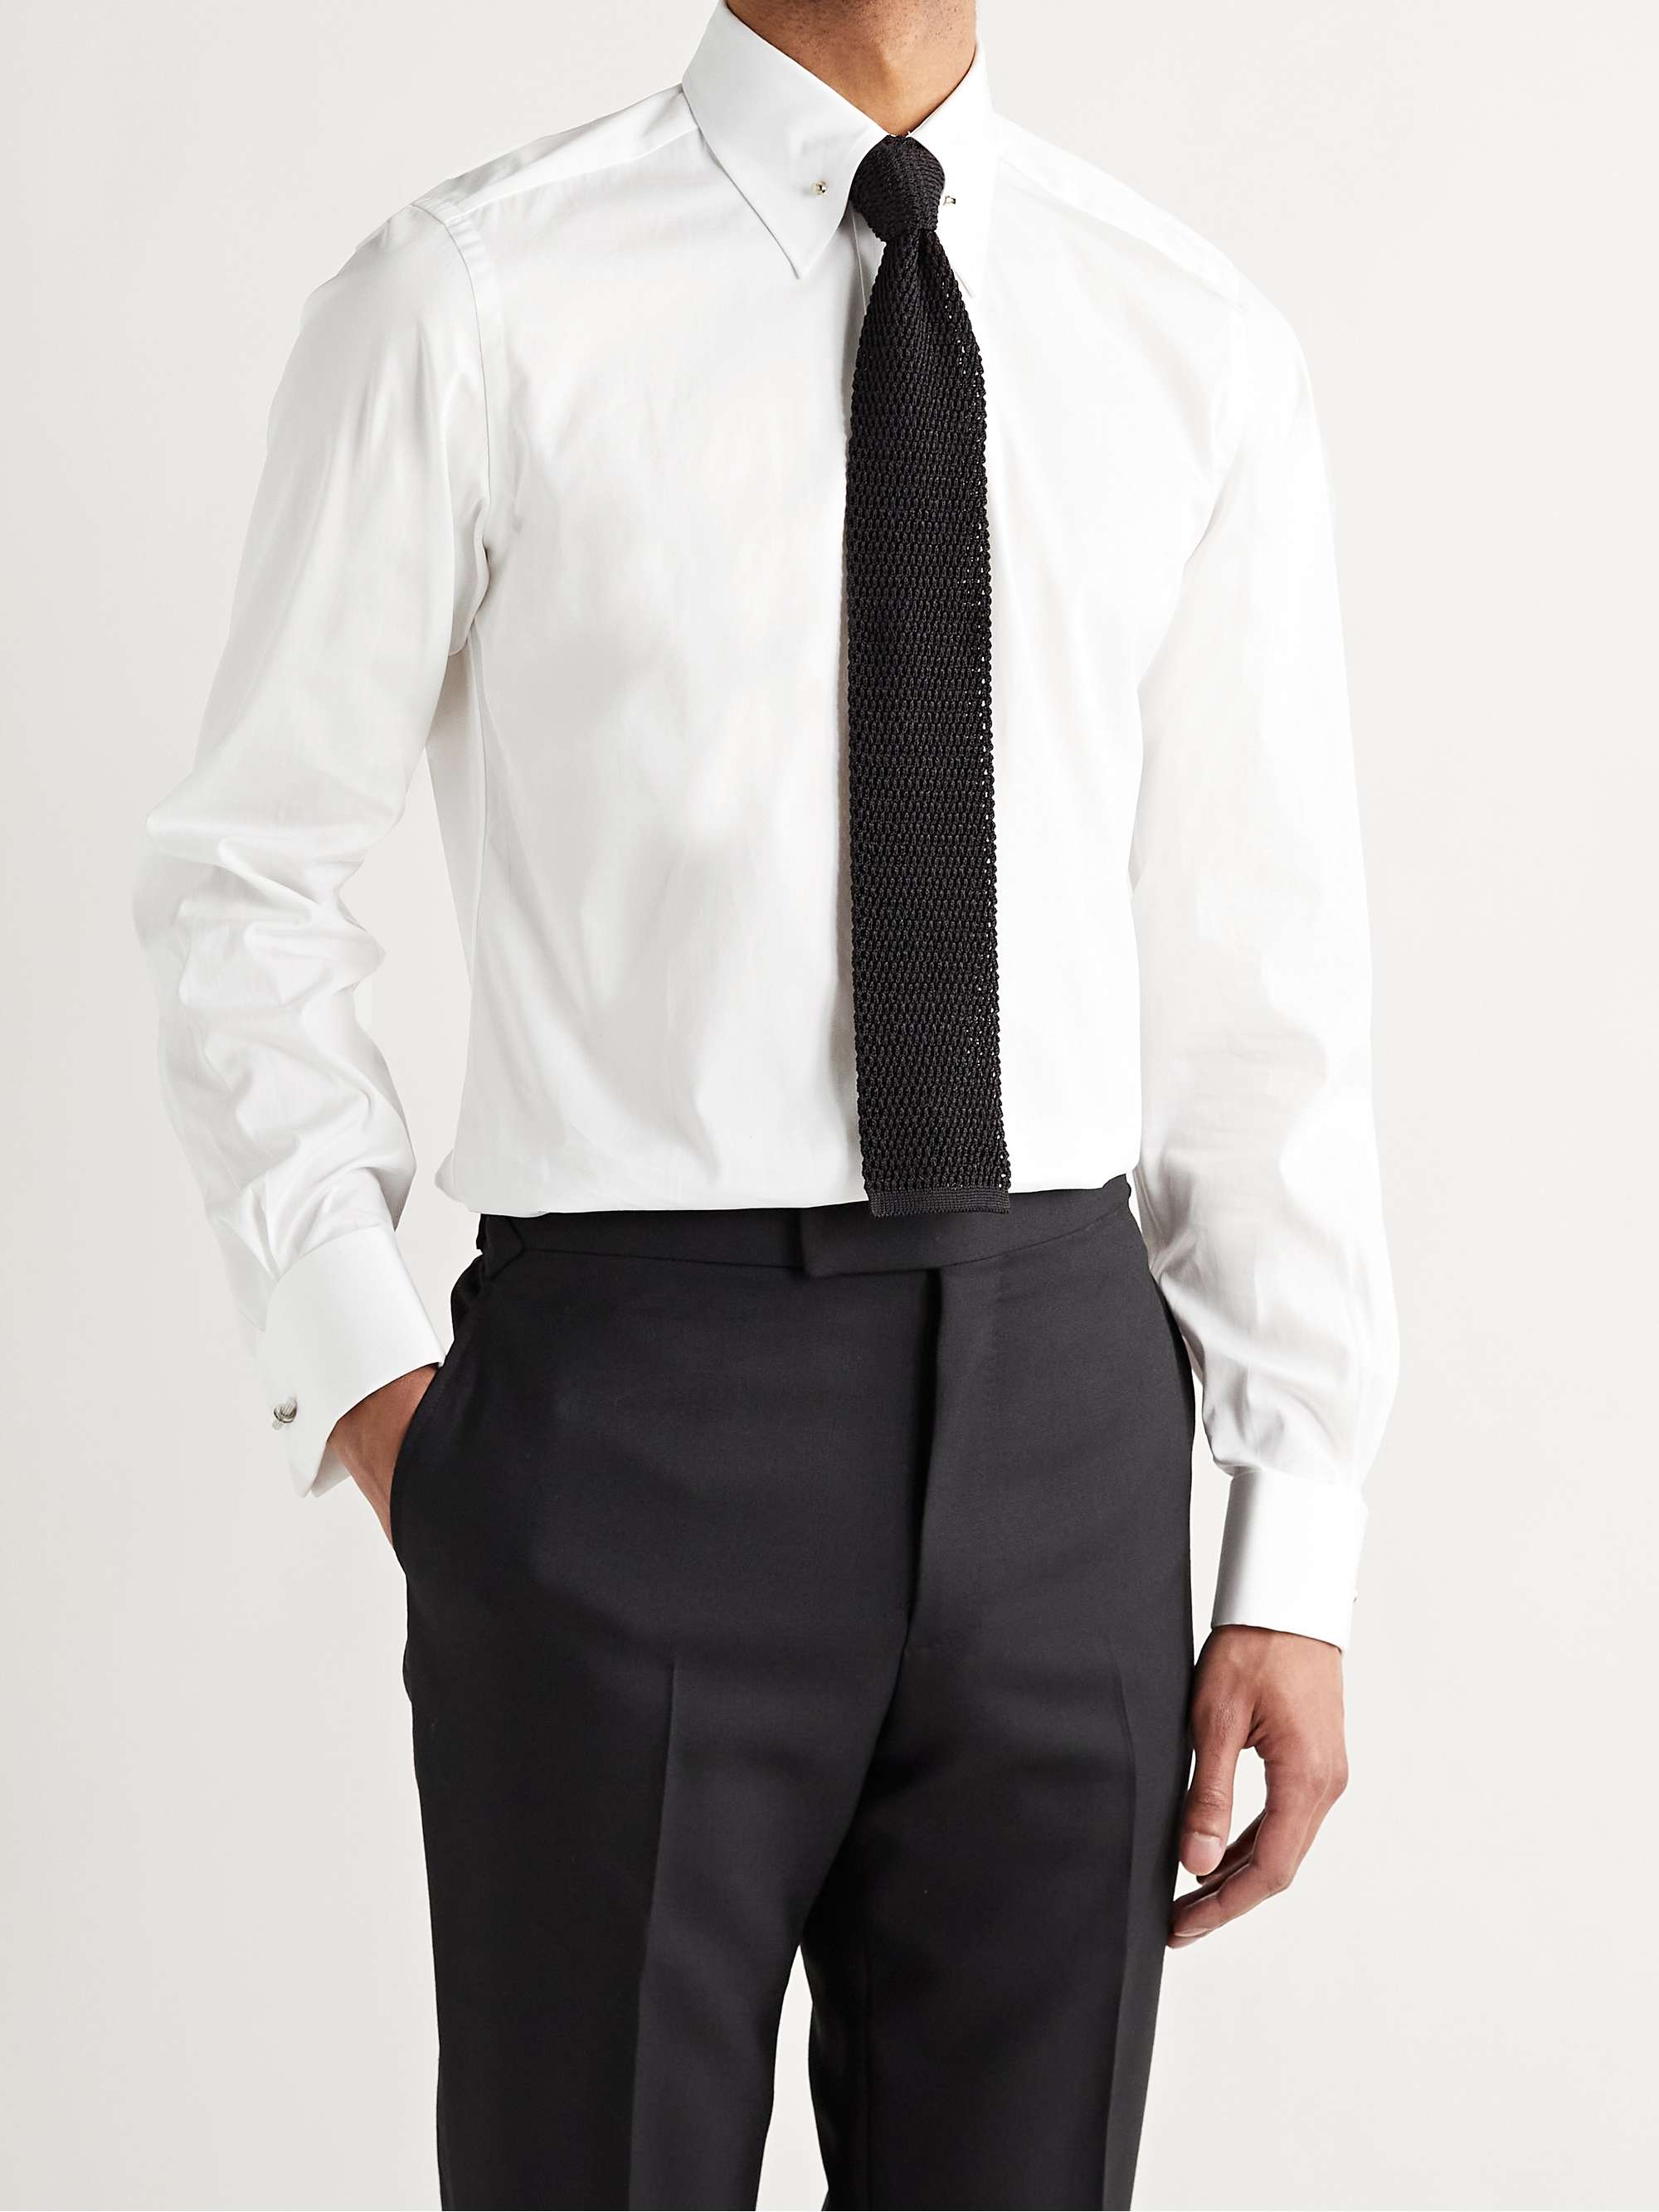 TOM FORD White Slim-Fit Pinned-Collar Double-Cuff Cotton-Poplin Shirt